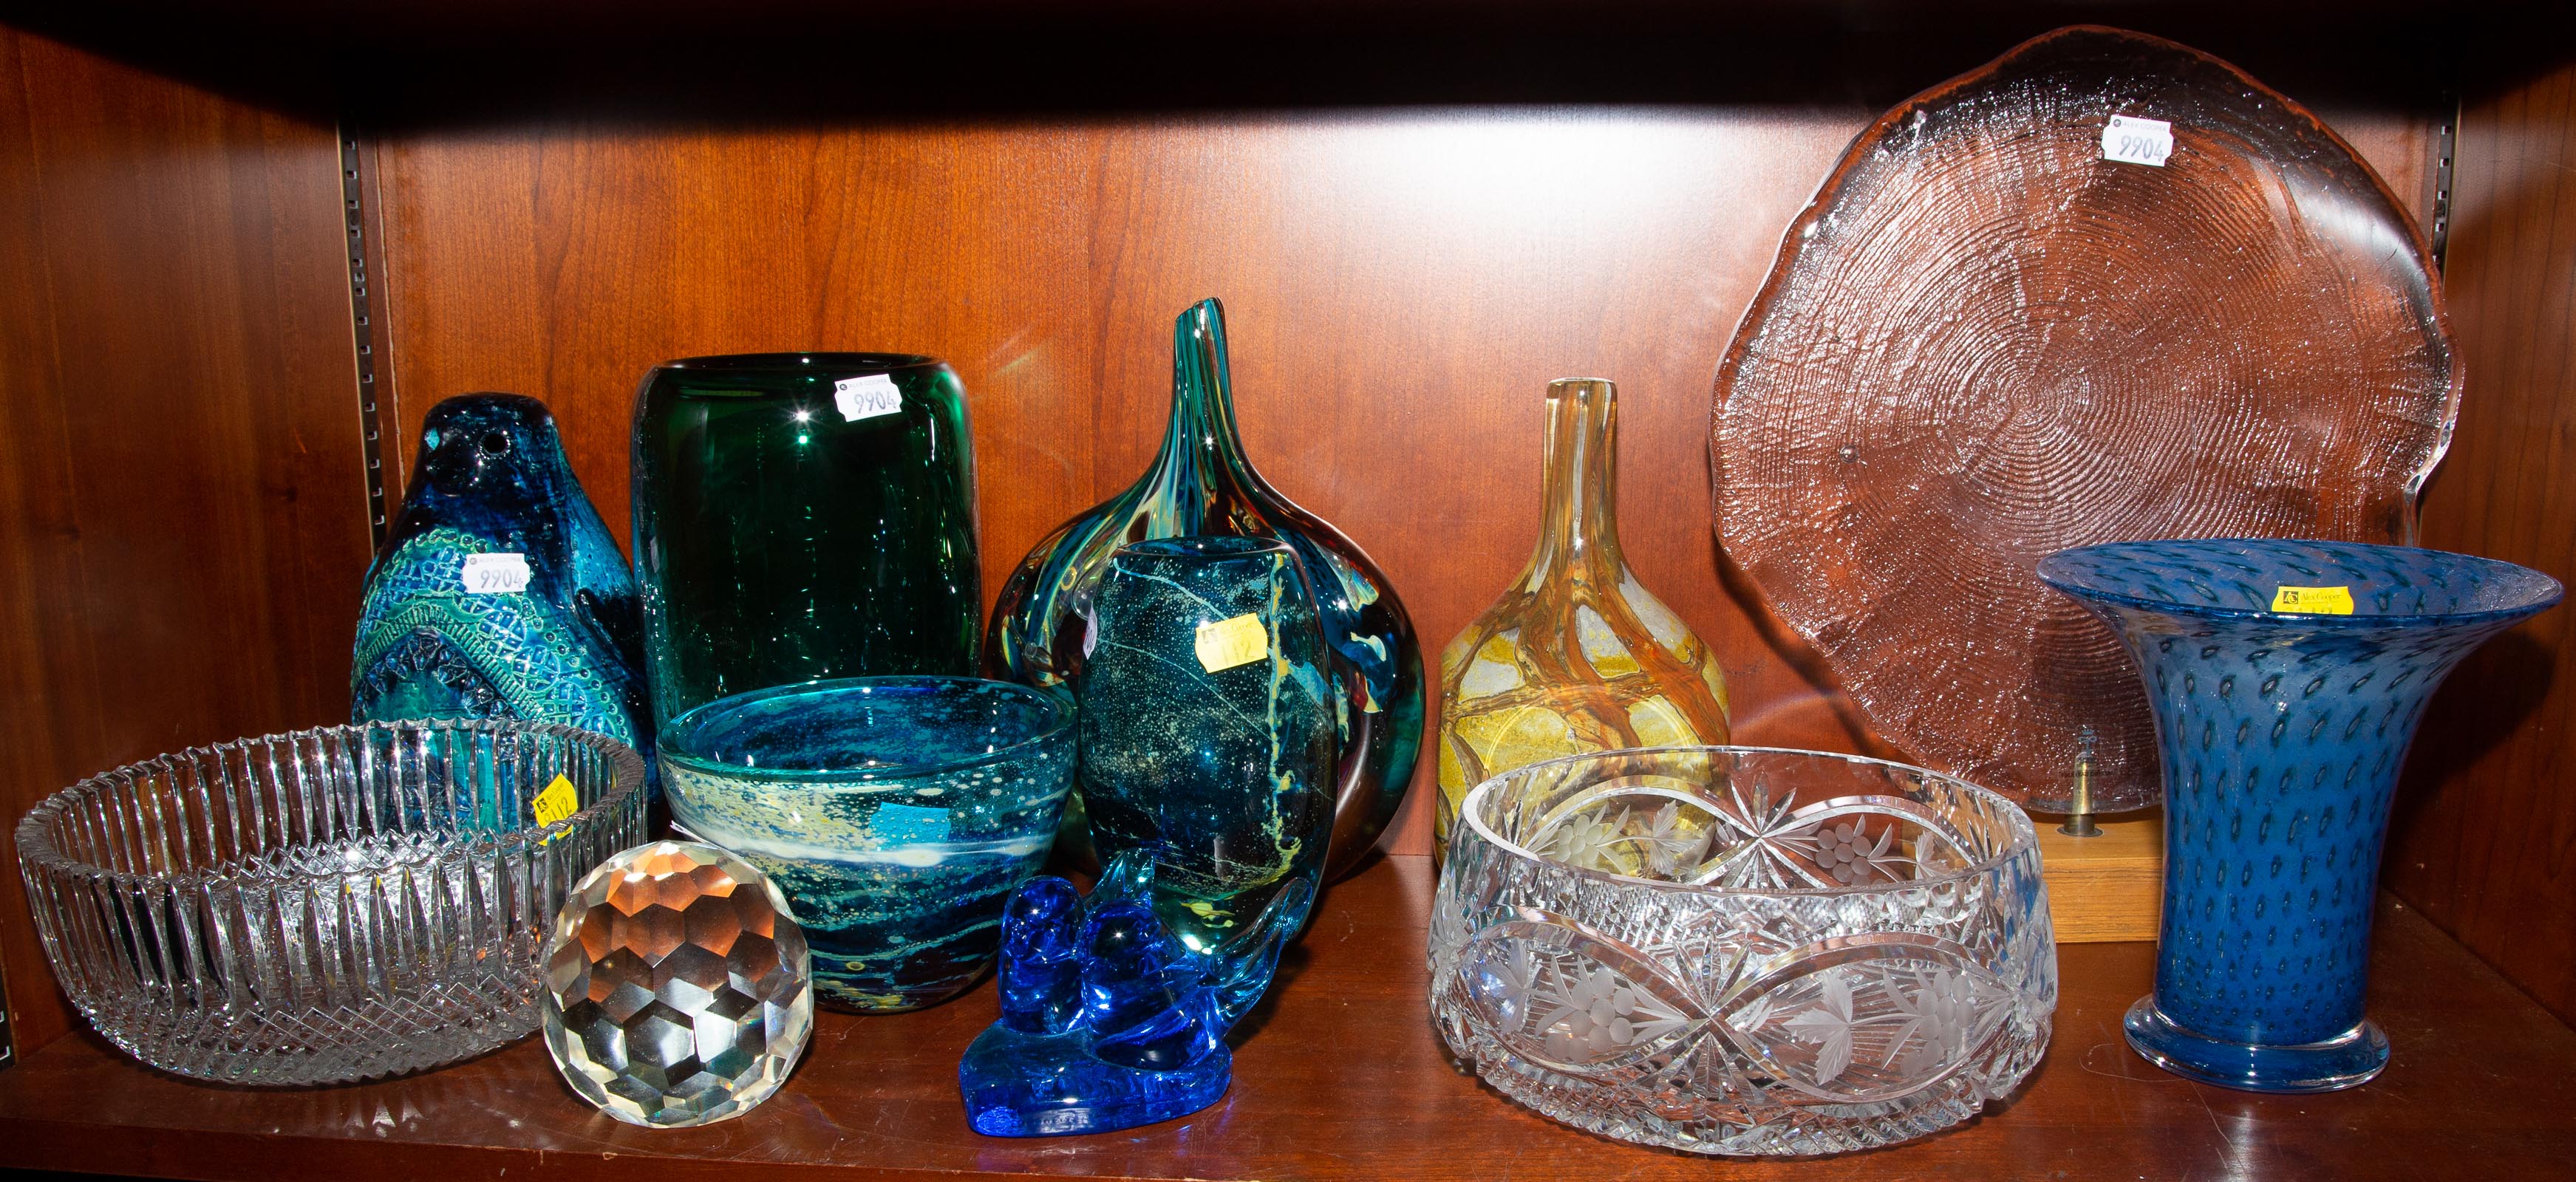 SELECTION OF CONTEMPORARY ART GLASS